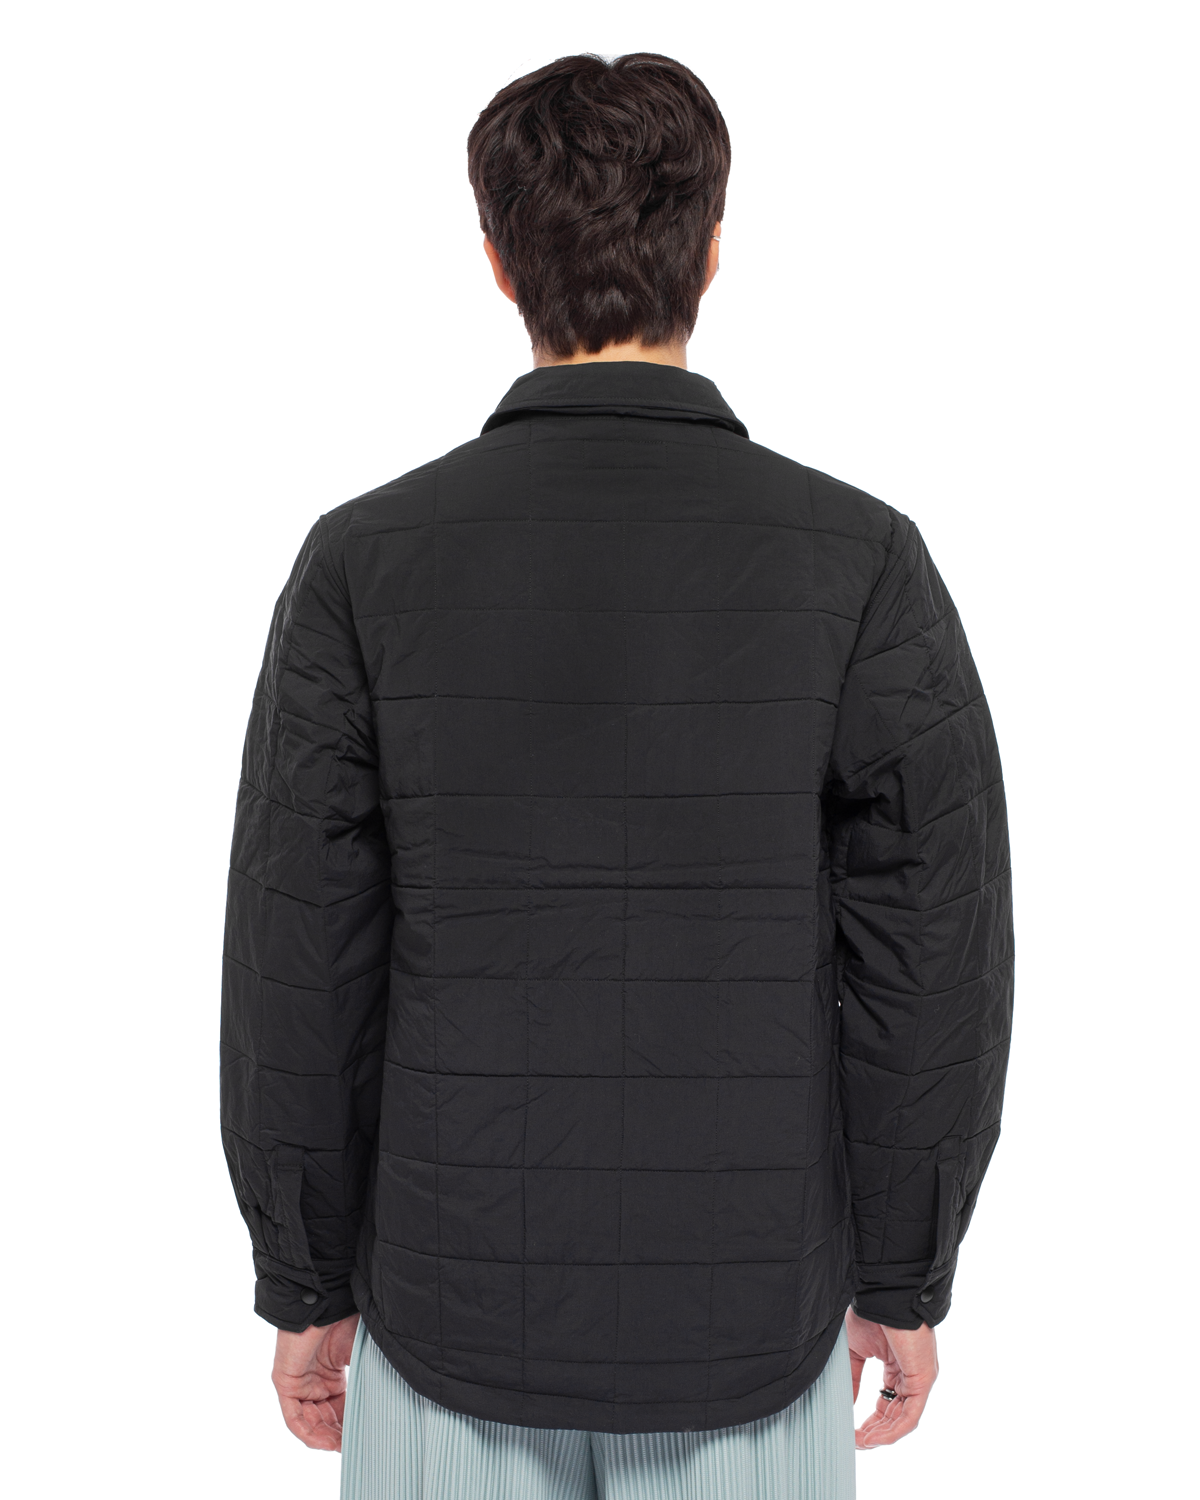 Quilted Fatigue Shirt Black